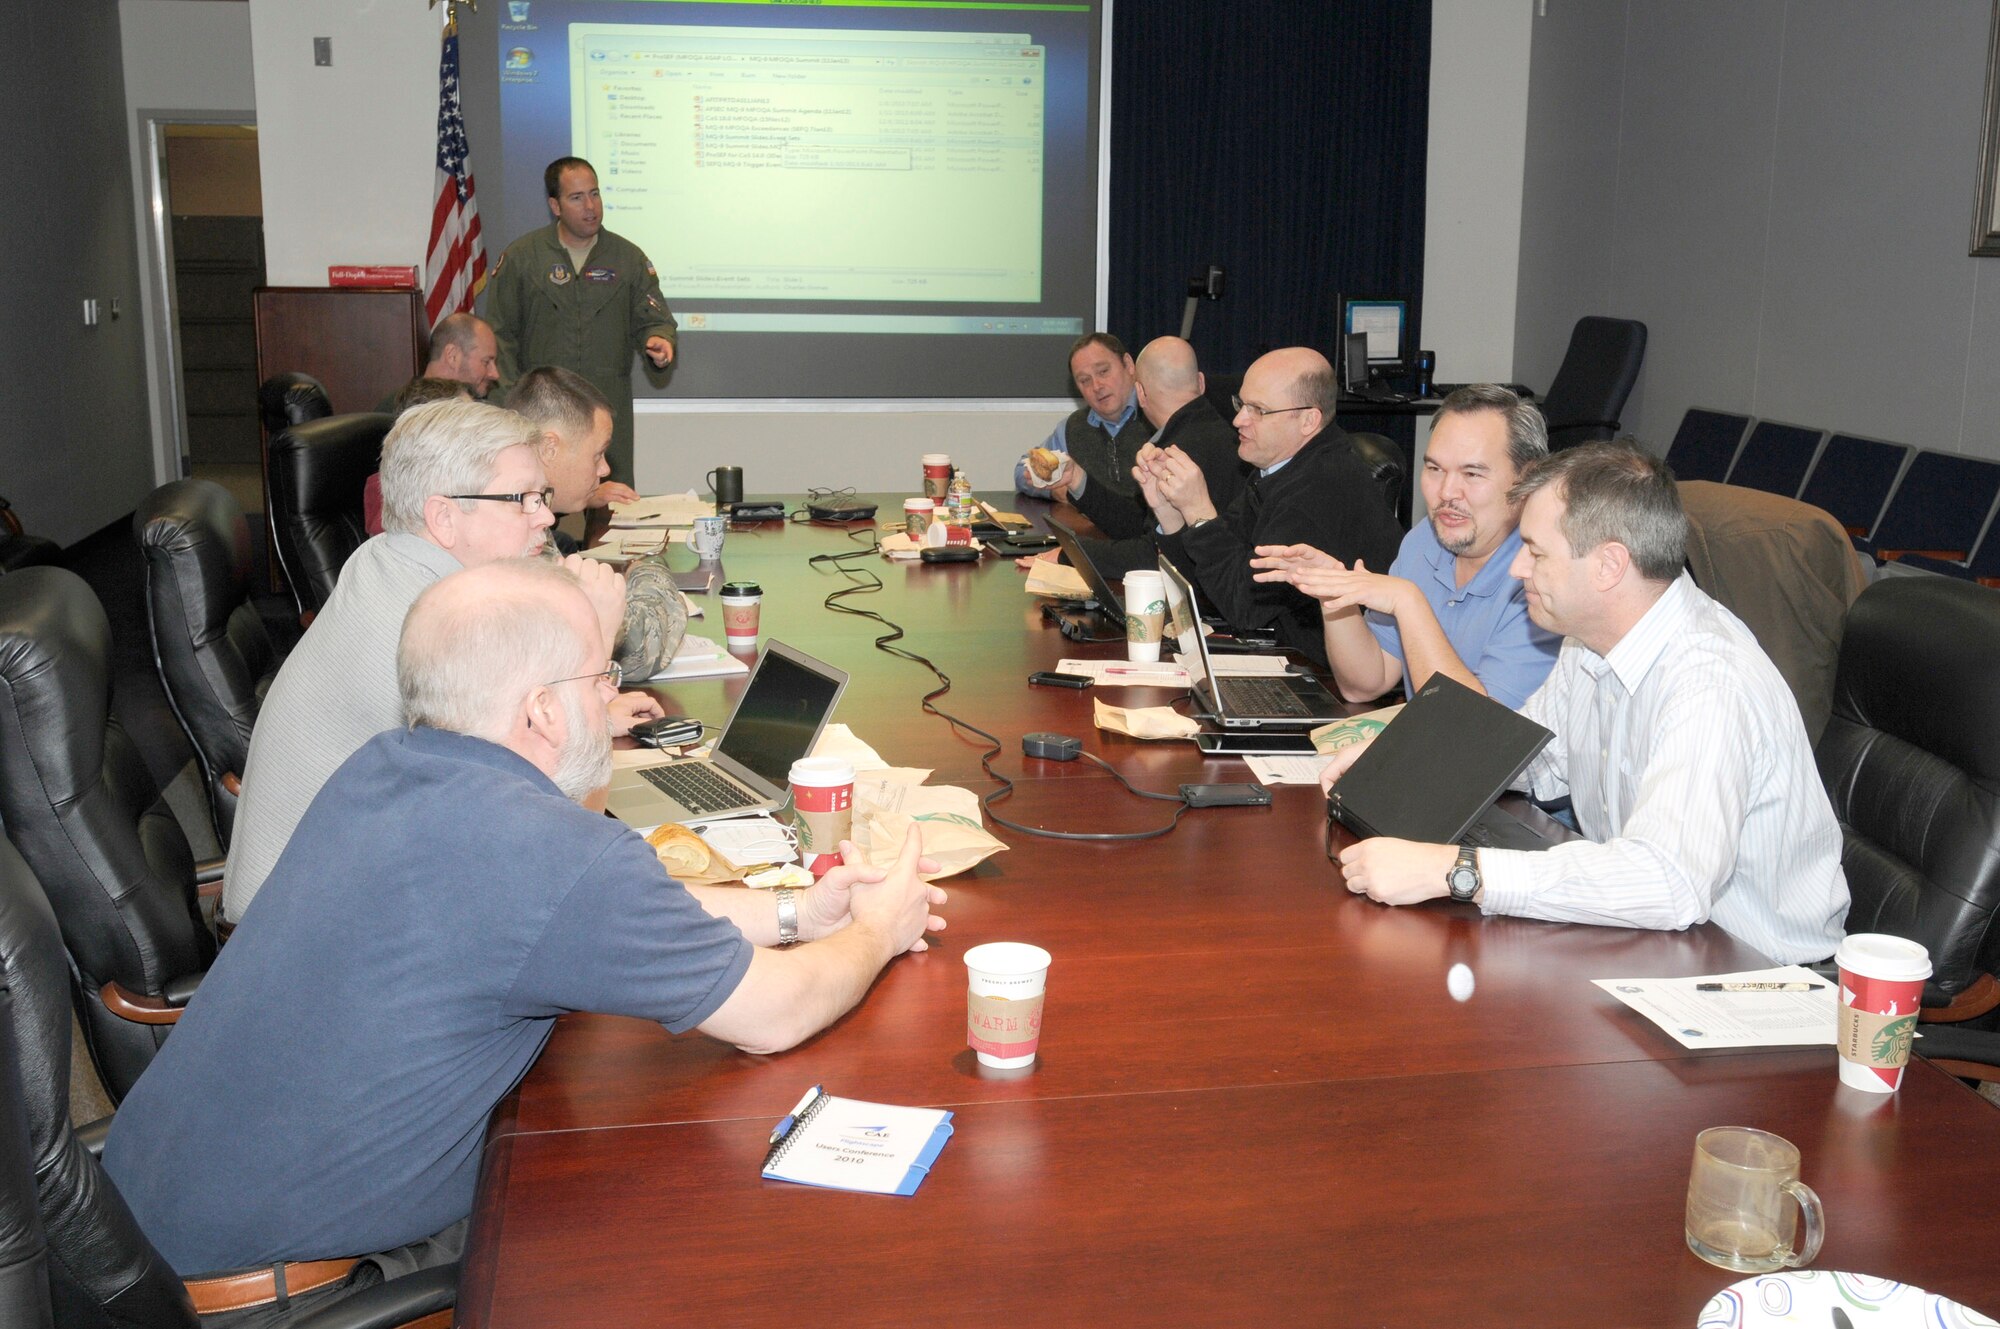 More than 20 Air Force and contractor experts from the aviation safety community discuss the use of Military Flight Operations Quality Assurance in support of the MQ-9. Key topics addressed during the meeting hosted by the Air Force Safety Center, Kirtland AFB, N.M., included the use of data files to create routine operations measurements and triggered events for analysts to detect potential mishap precursors. (U.S. Air Force photo by Keith Wright)